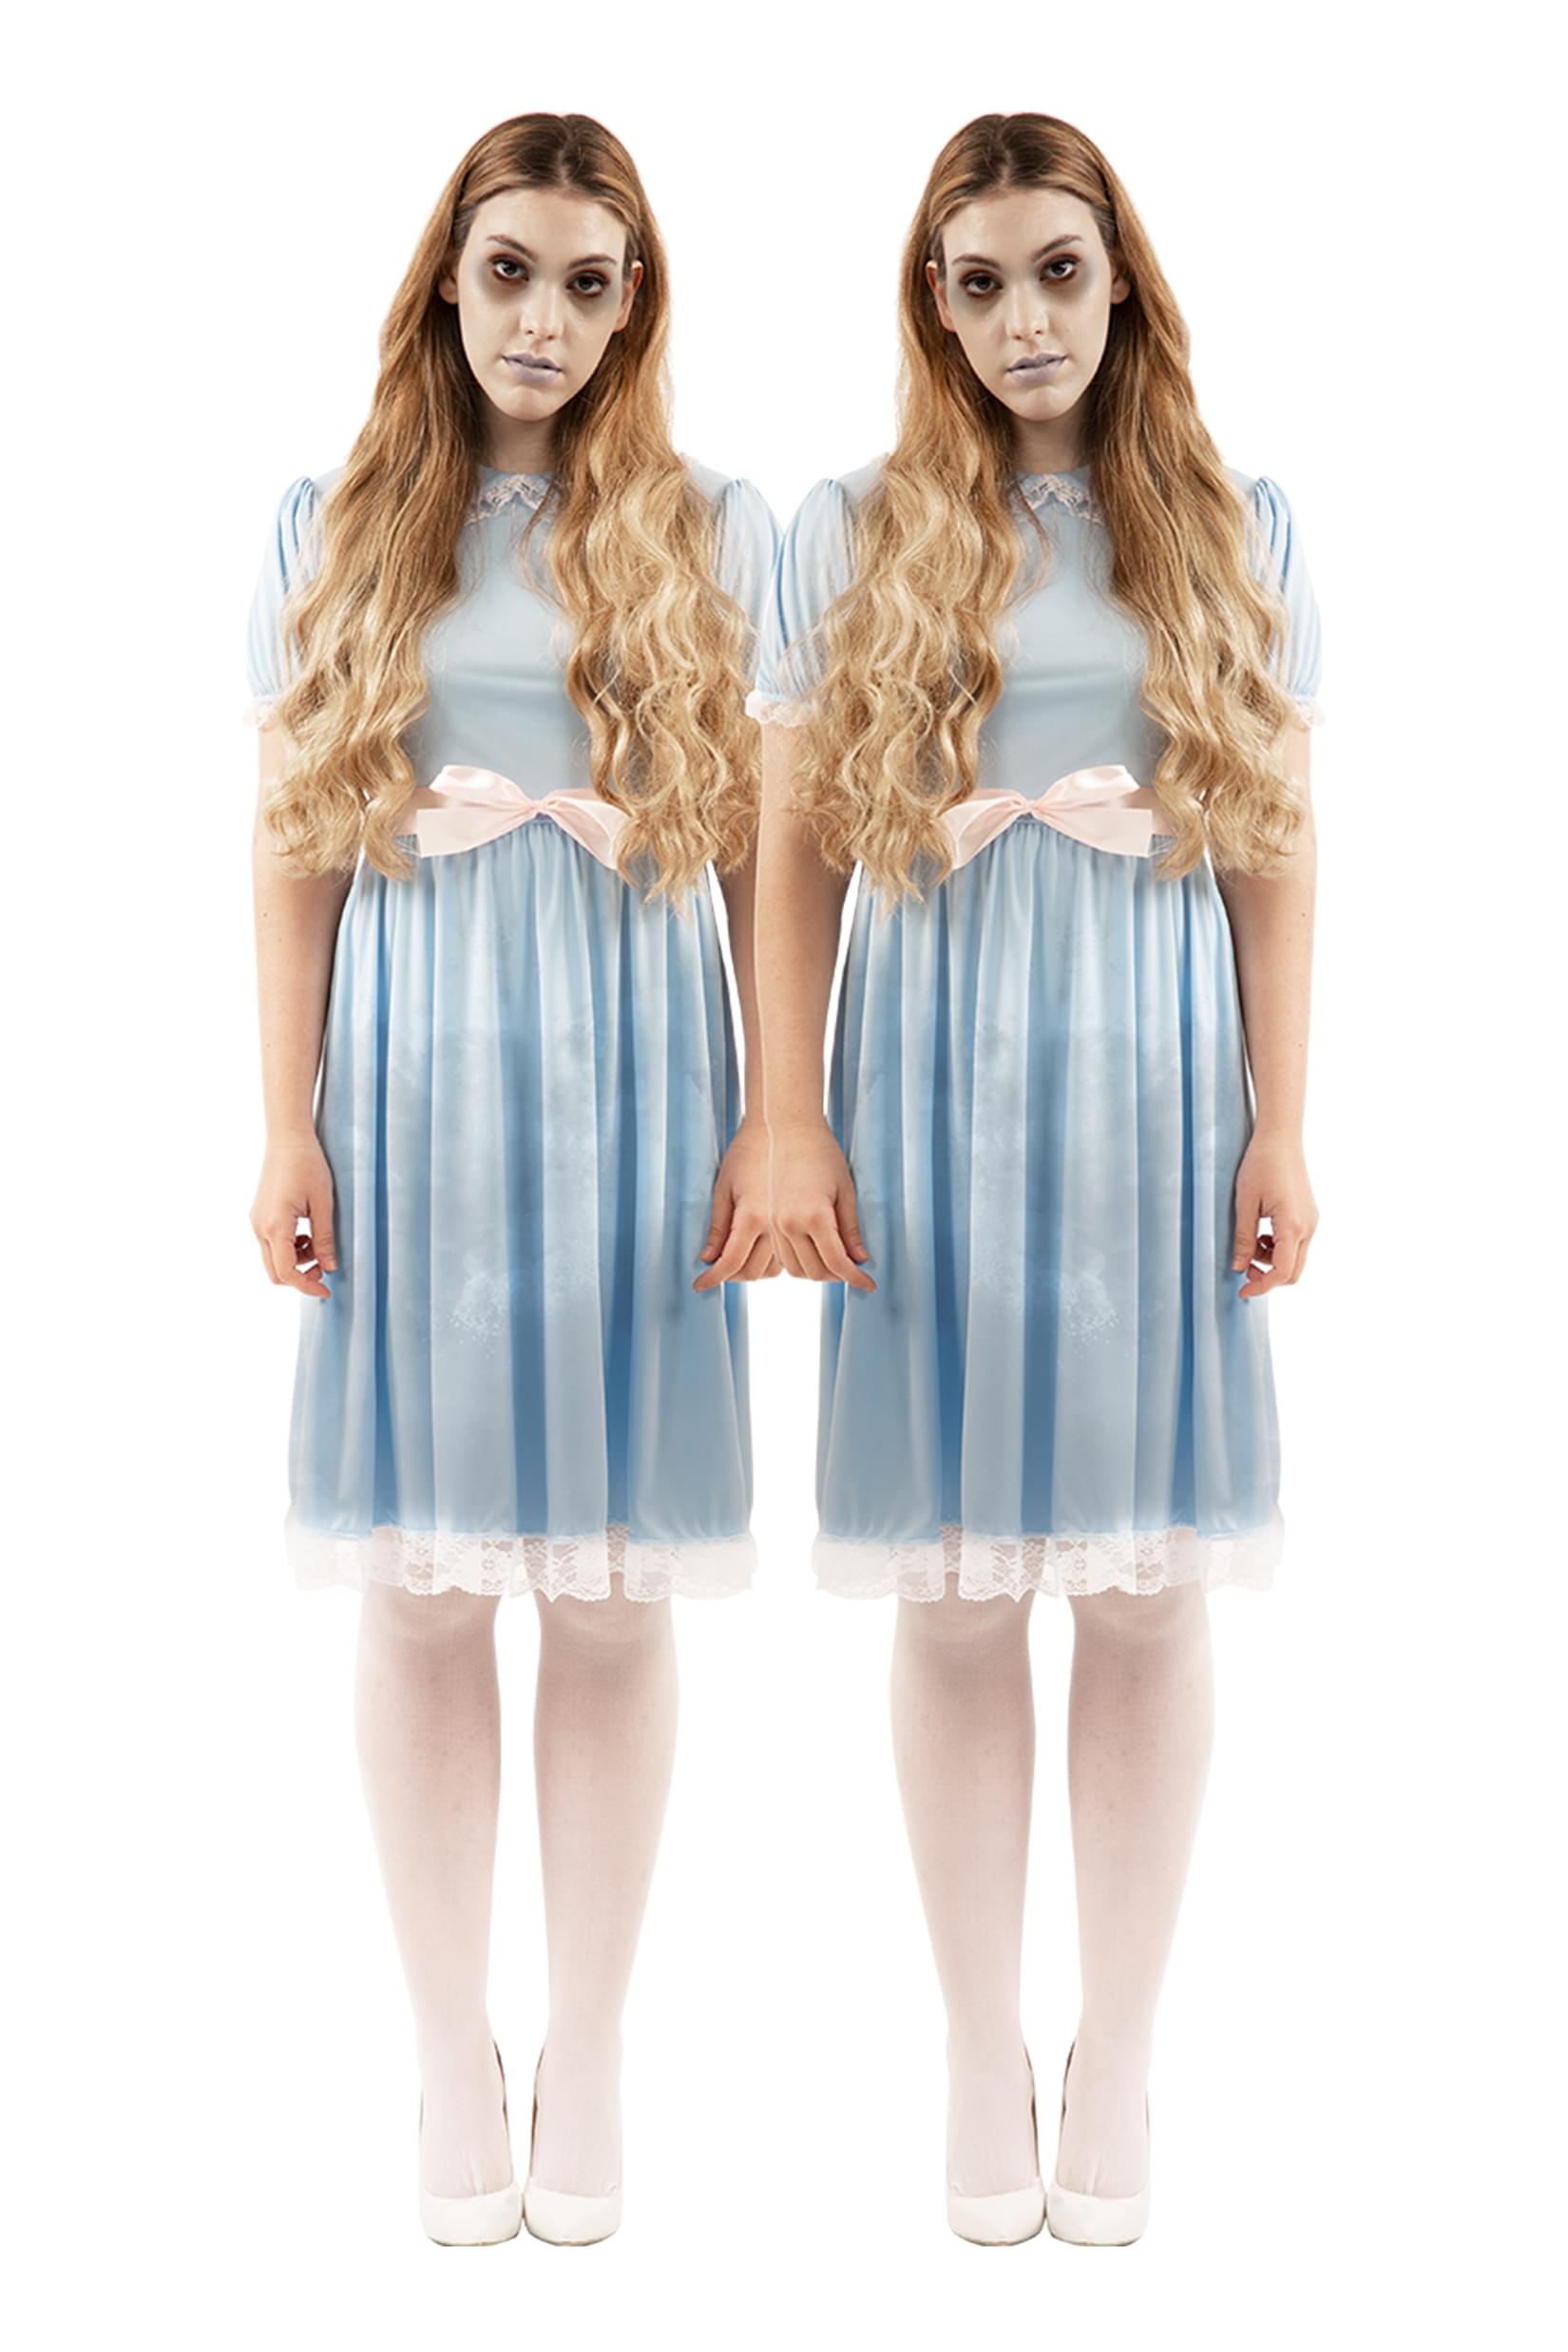 The Shining Grady Twins Costume | Authentic Movie Design | Sized For Adults